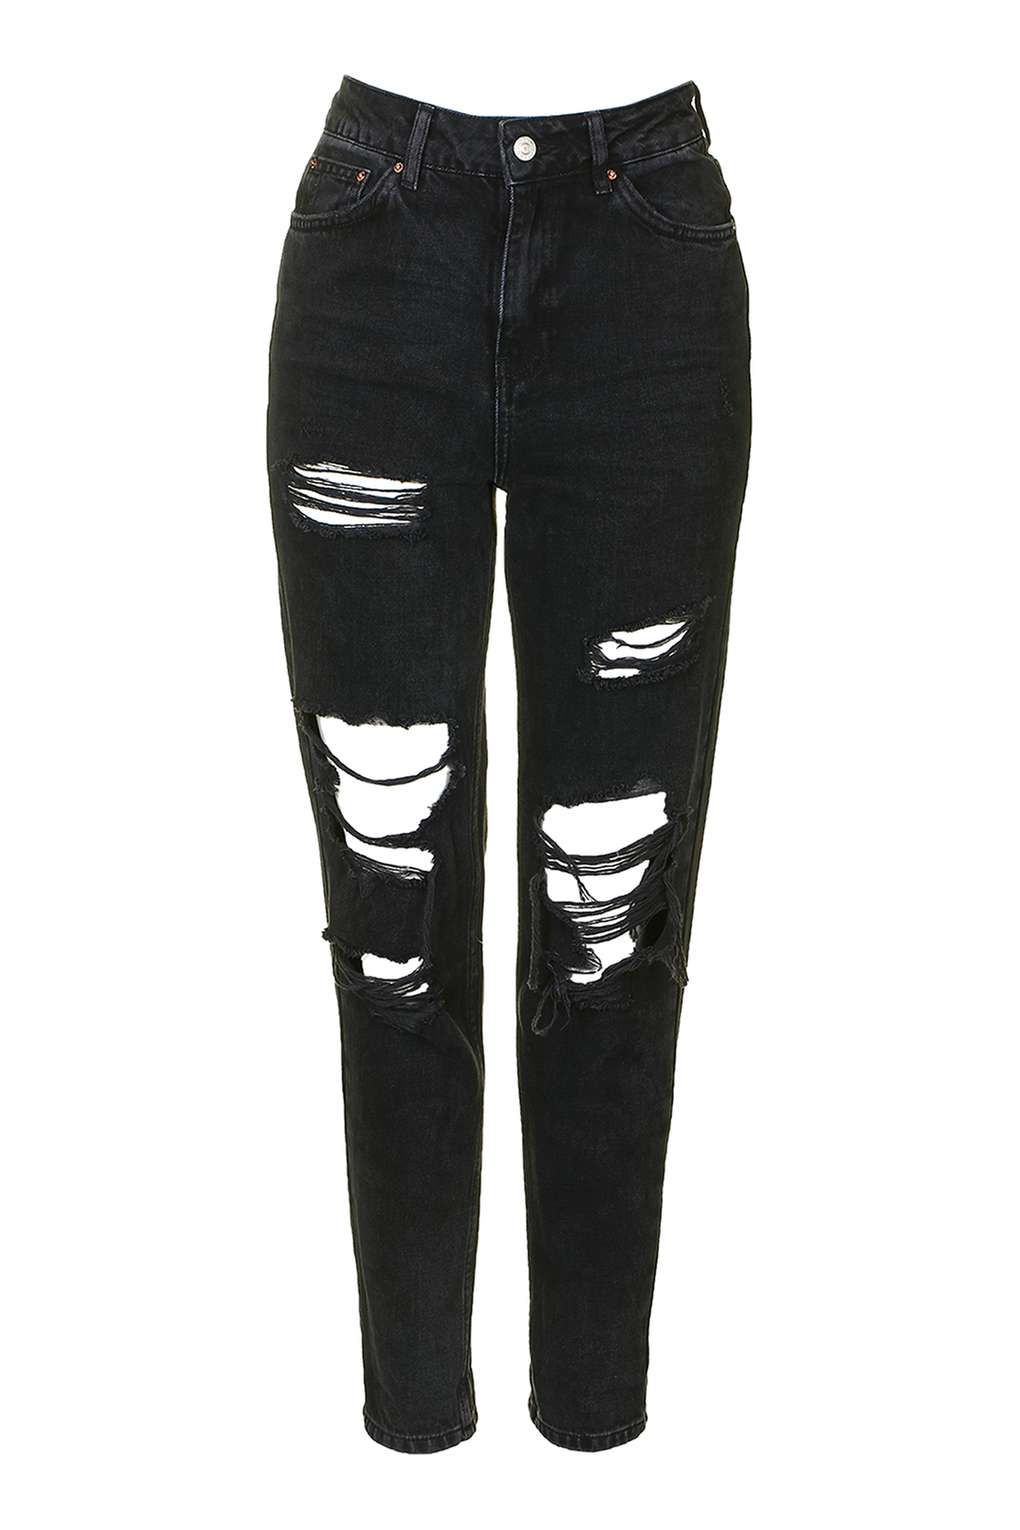 Best 15 Black Ripped Jeans Outfit Ideas for Women: Style Guide